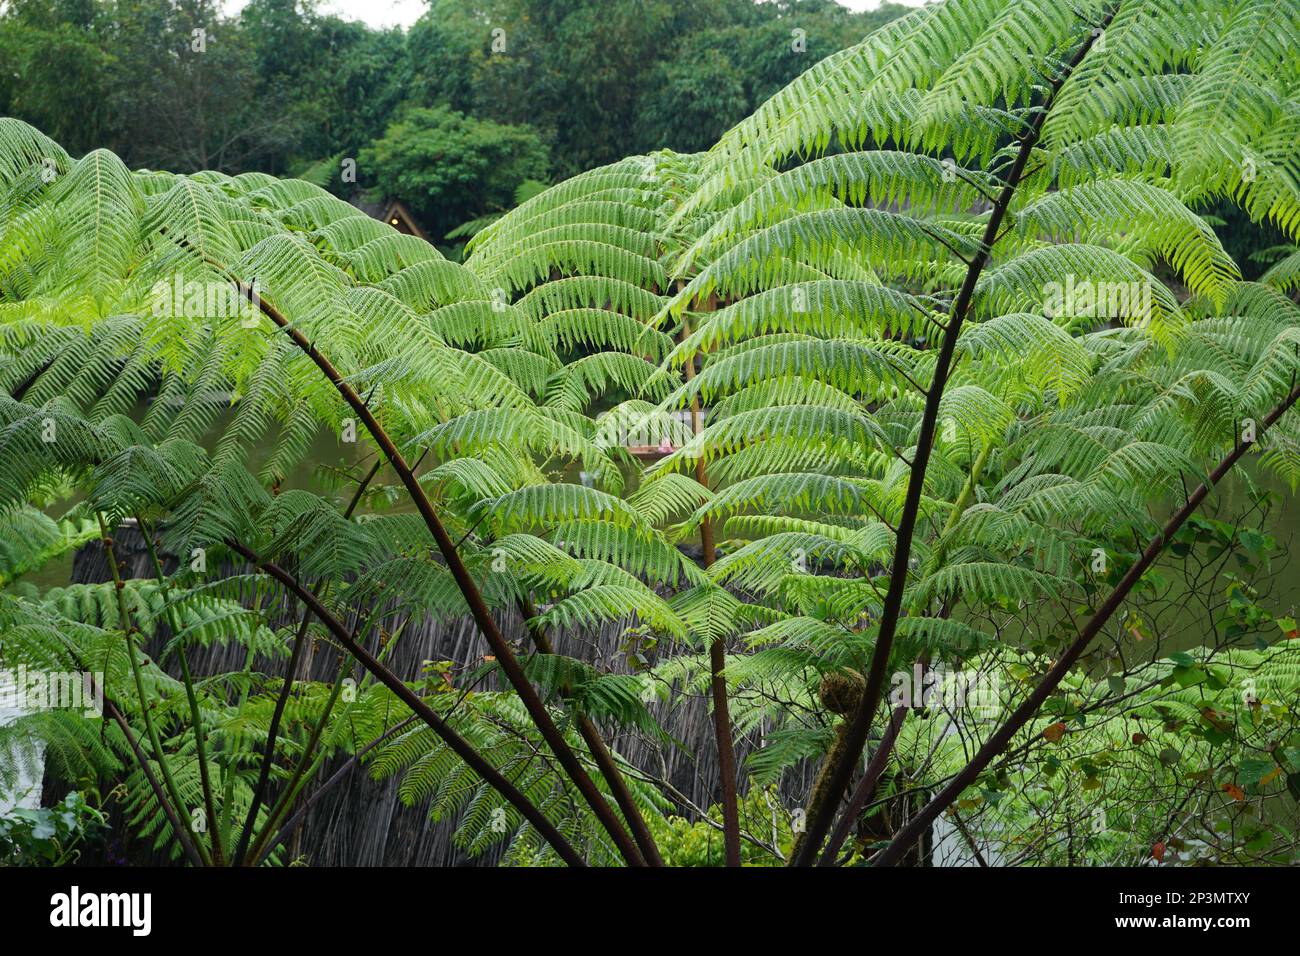 Sphaeropteris lepifera, synonym Cyathea lepifera, the brush pot tree, is a tree fern that grows in the mountains of East and Southeast Asia, which can Stock Photo